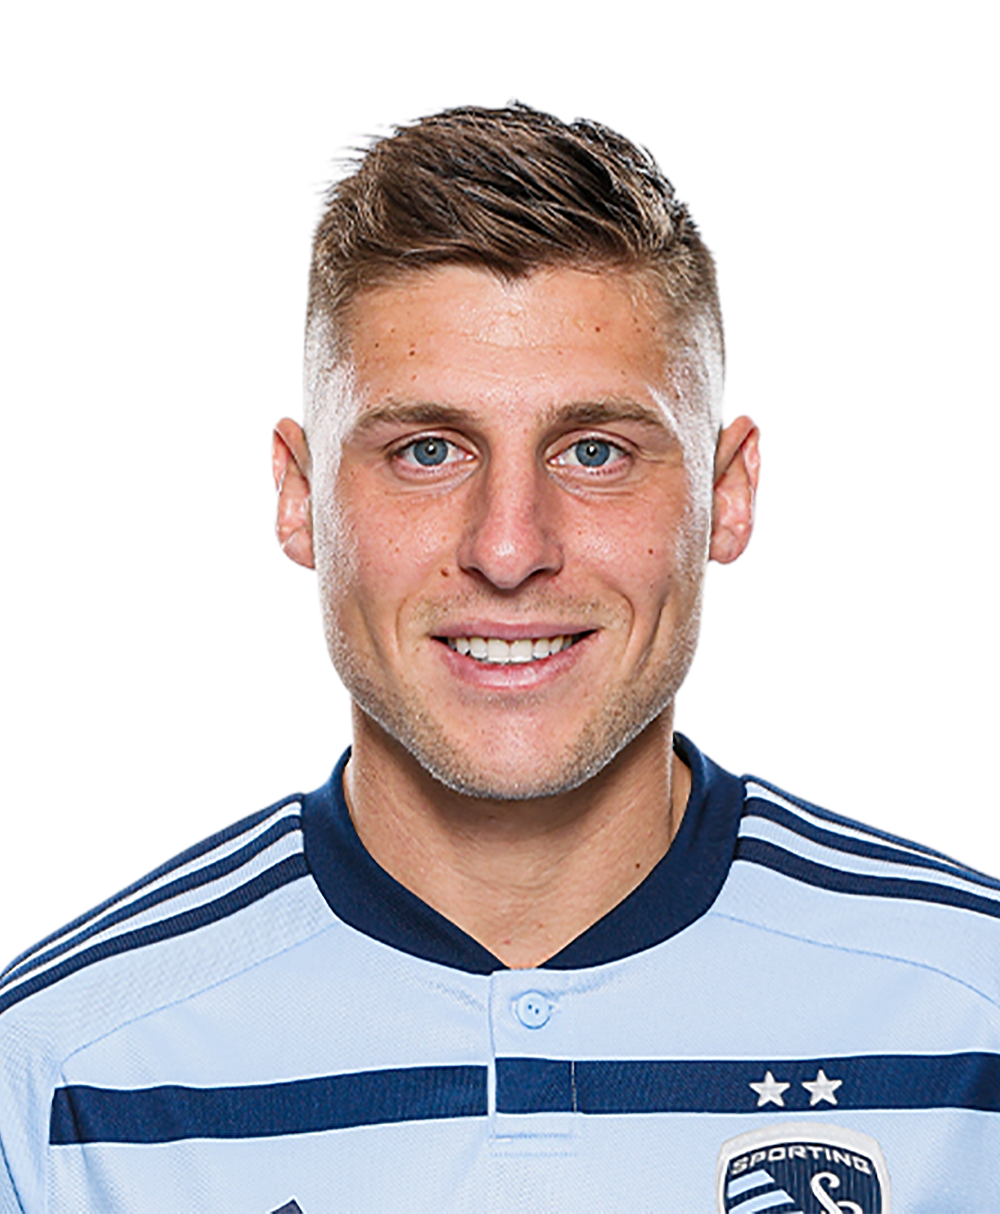 Sporting KC takes a 3-1 lead vs. St. Louis in the first half after goals by  Remi Walter and Gadi Kinda